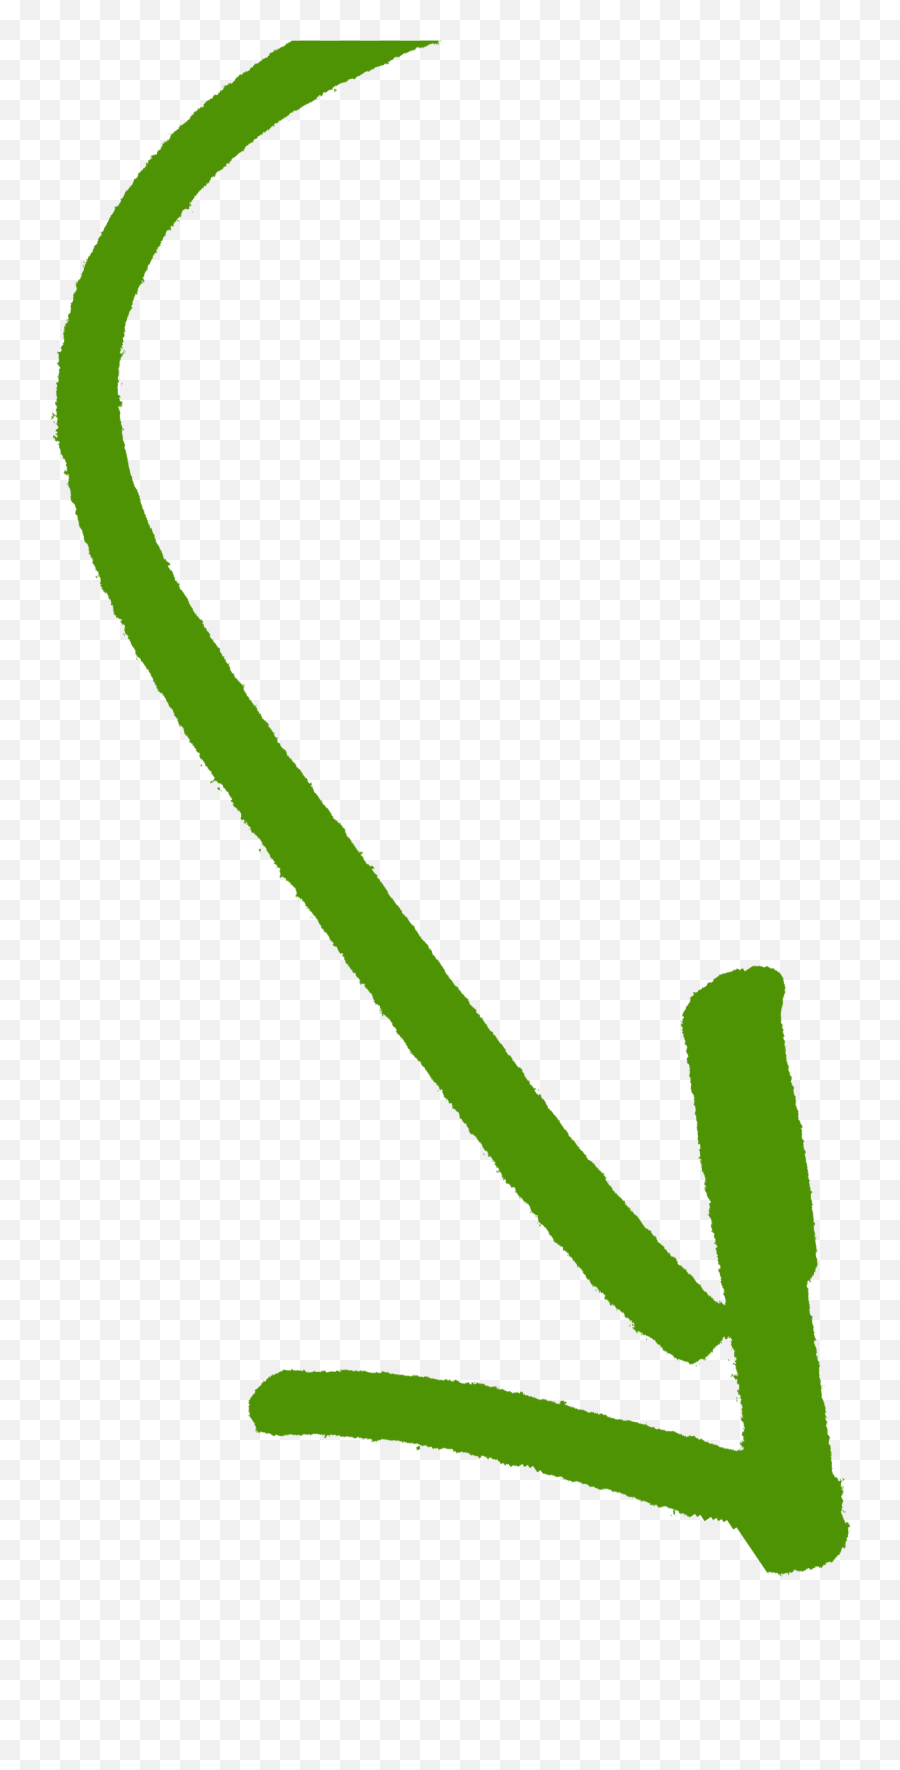 green curved arrow png